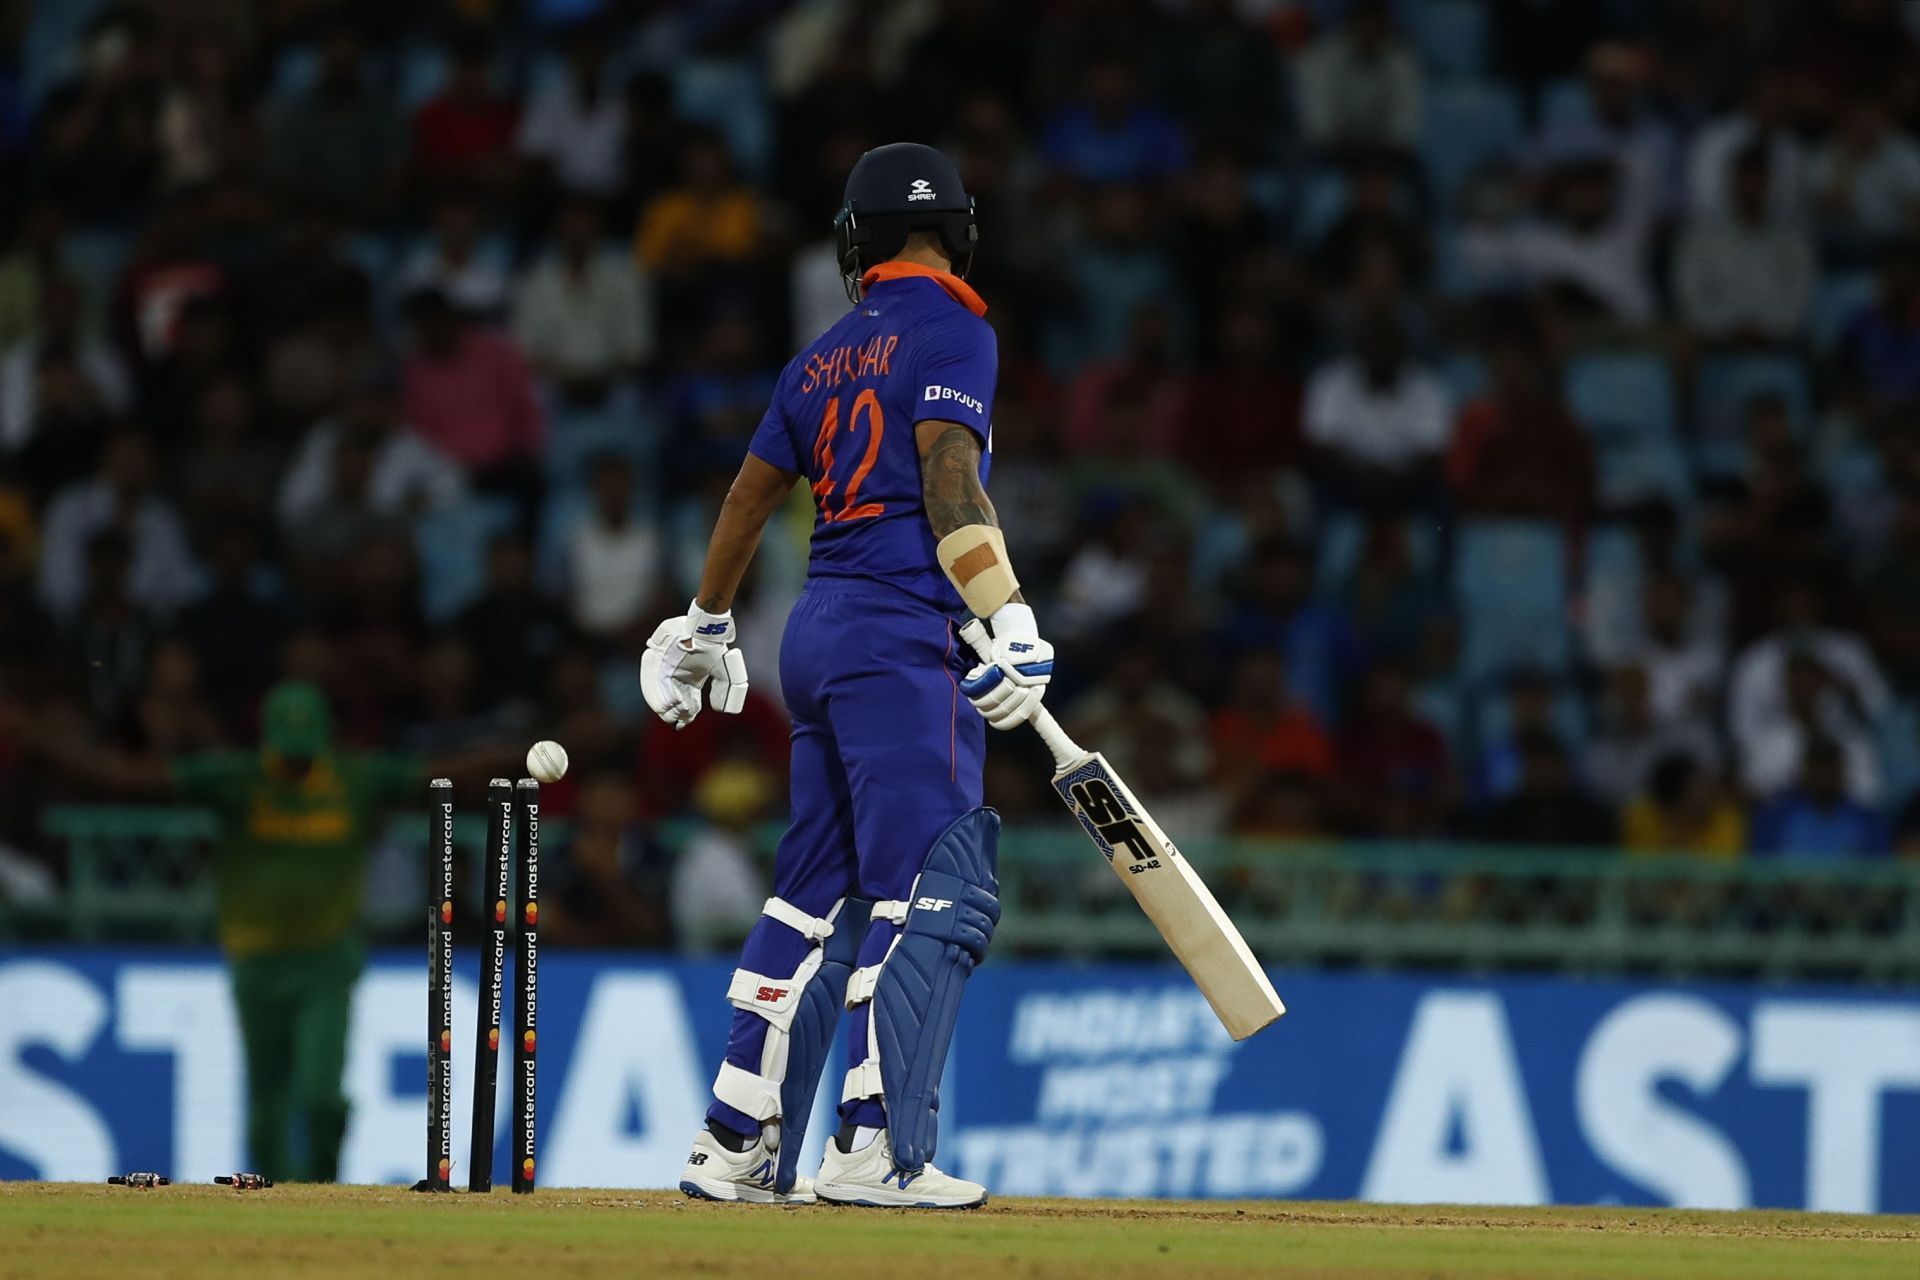 Shikhar Dhawan was bowled while playing the reverse sweep.